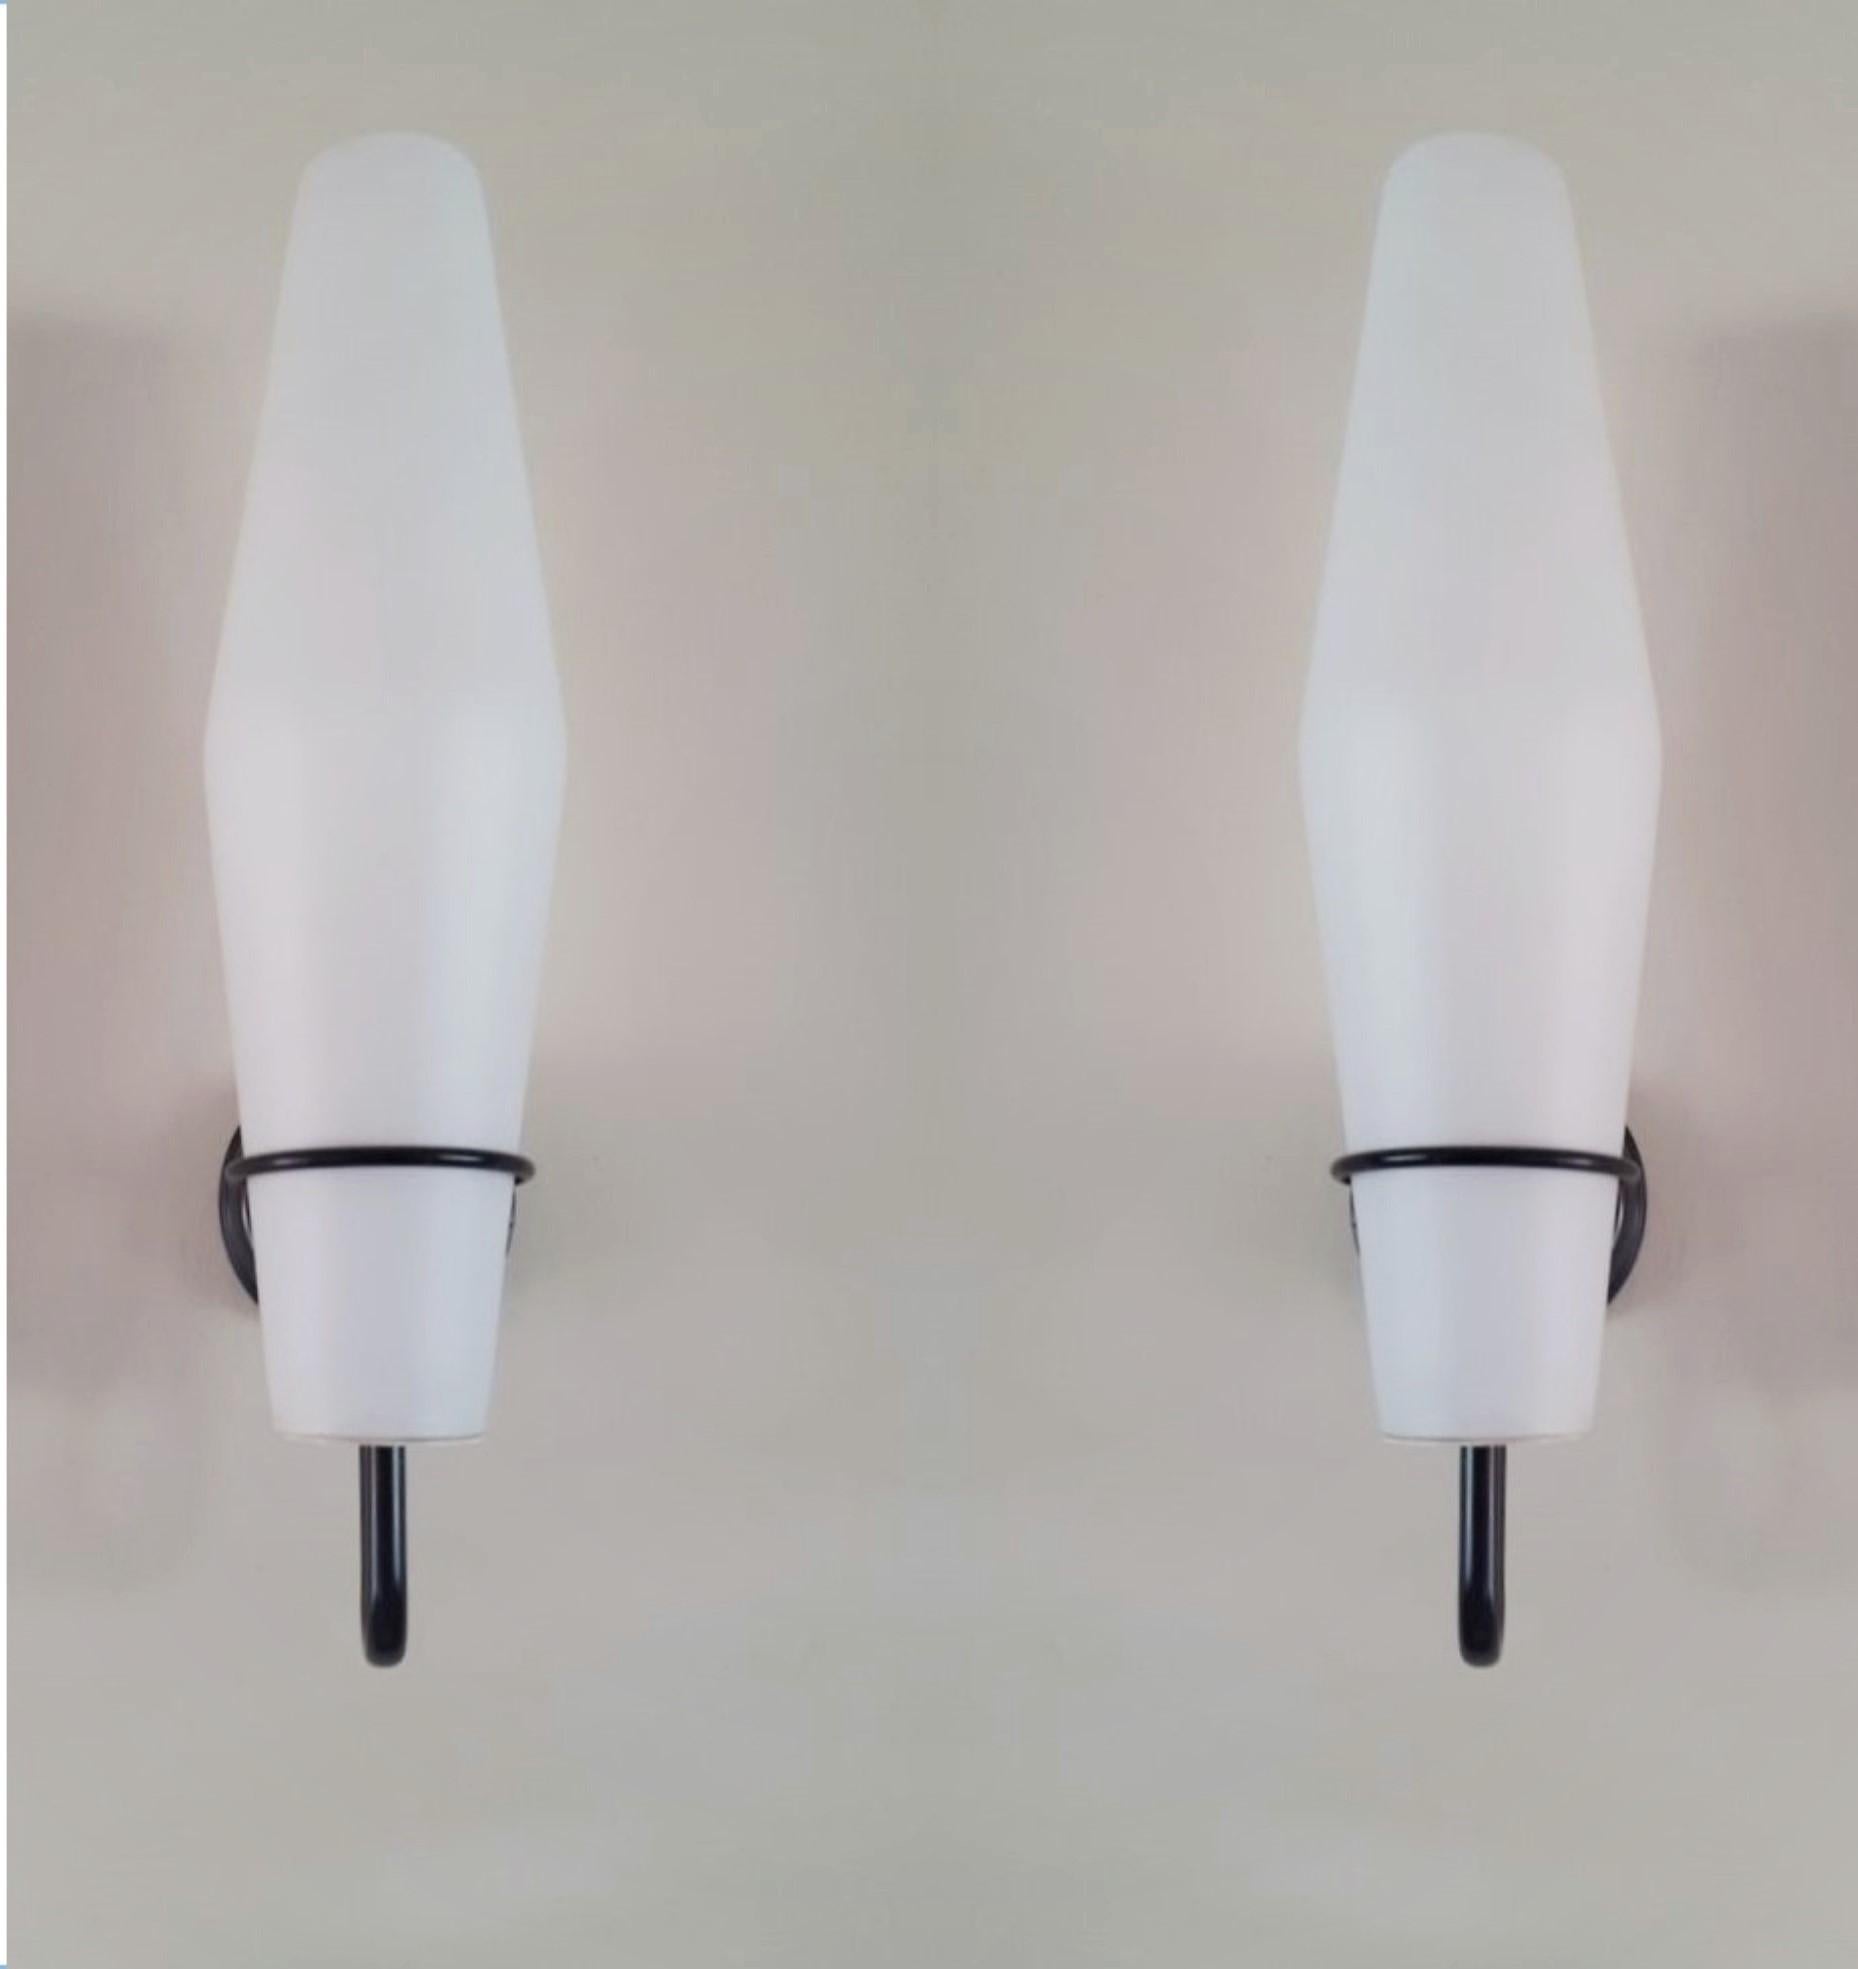 A pair of tall  Scandinavian wall sconces in the Style of Stilnovo, Dänemark, 1960s. Very elegant design with tall satin glass shades and lacquered black metal mounts. Both wall lights in fine vintage condition, no chips or cracks, rewired.
Each